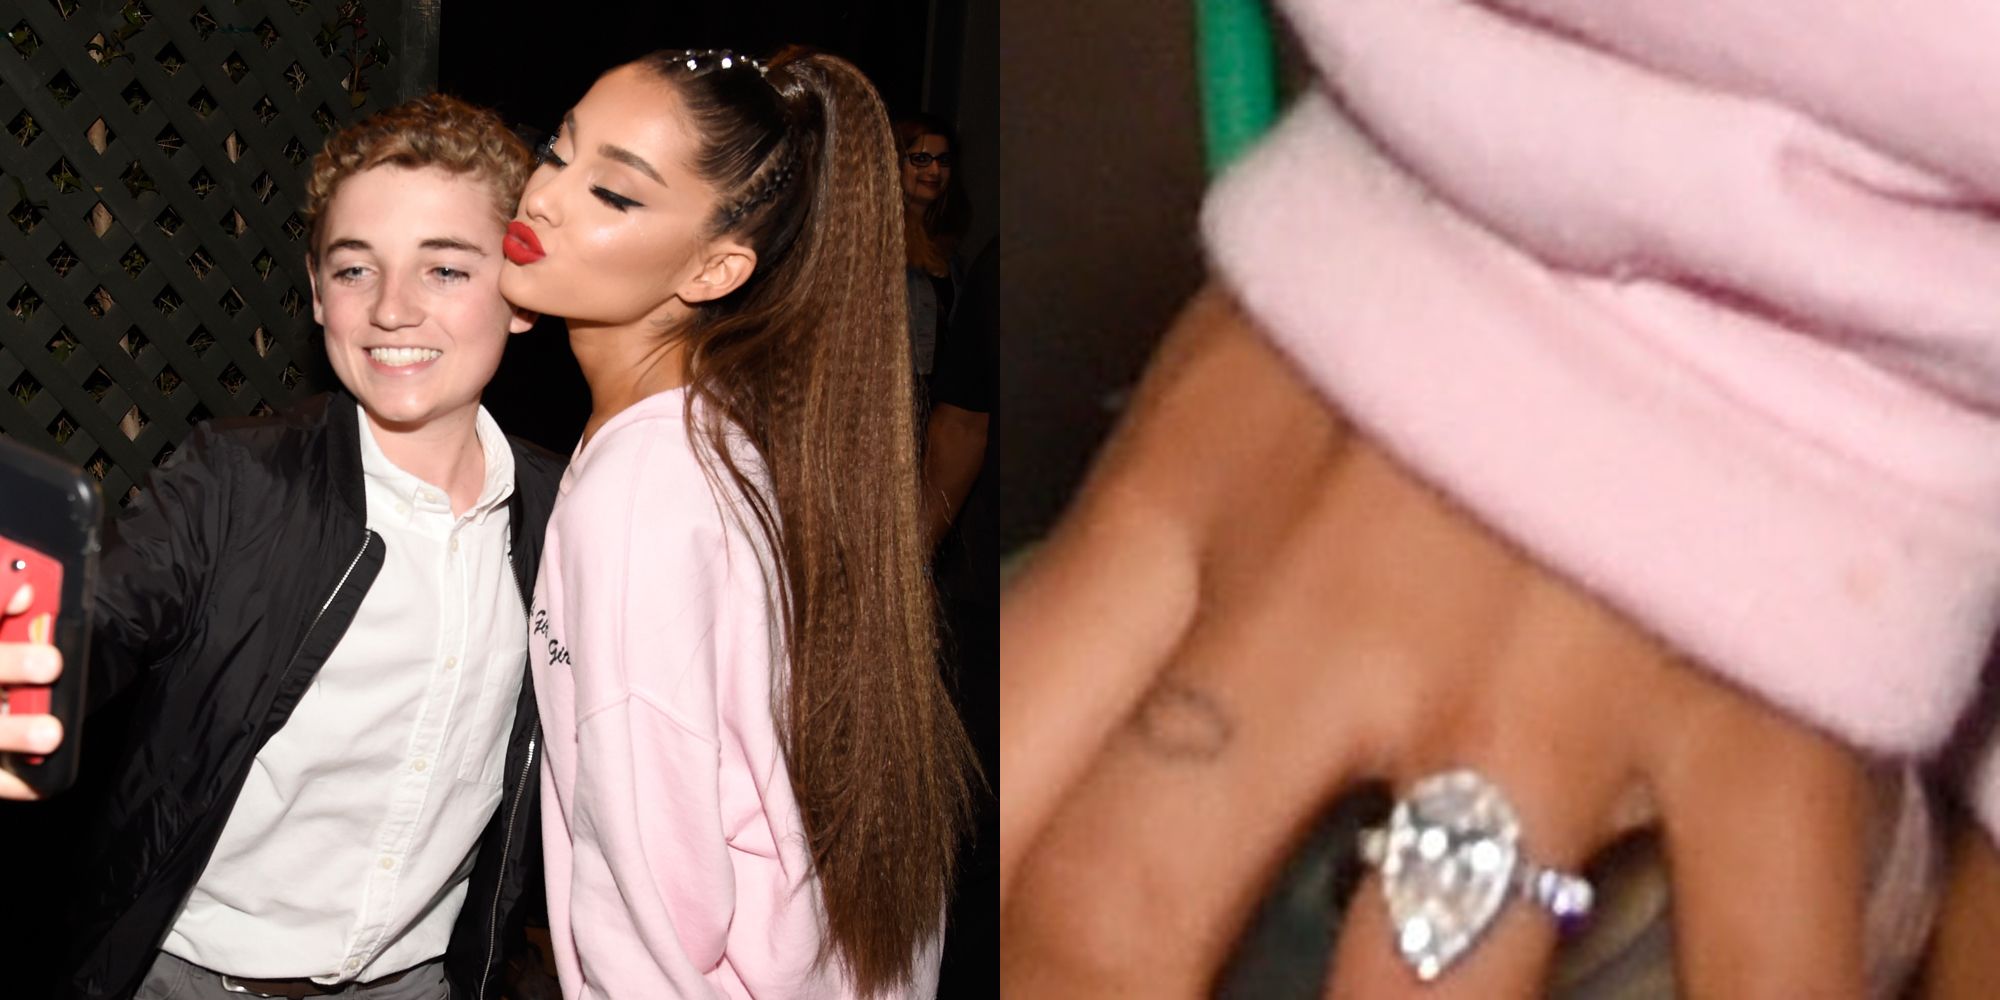 Ariana Grande's Engagement Ring Has A Touching Story Behind It - Capital